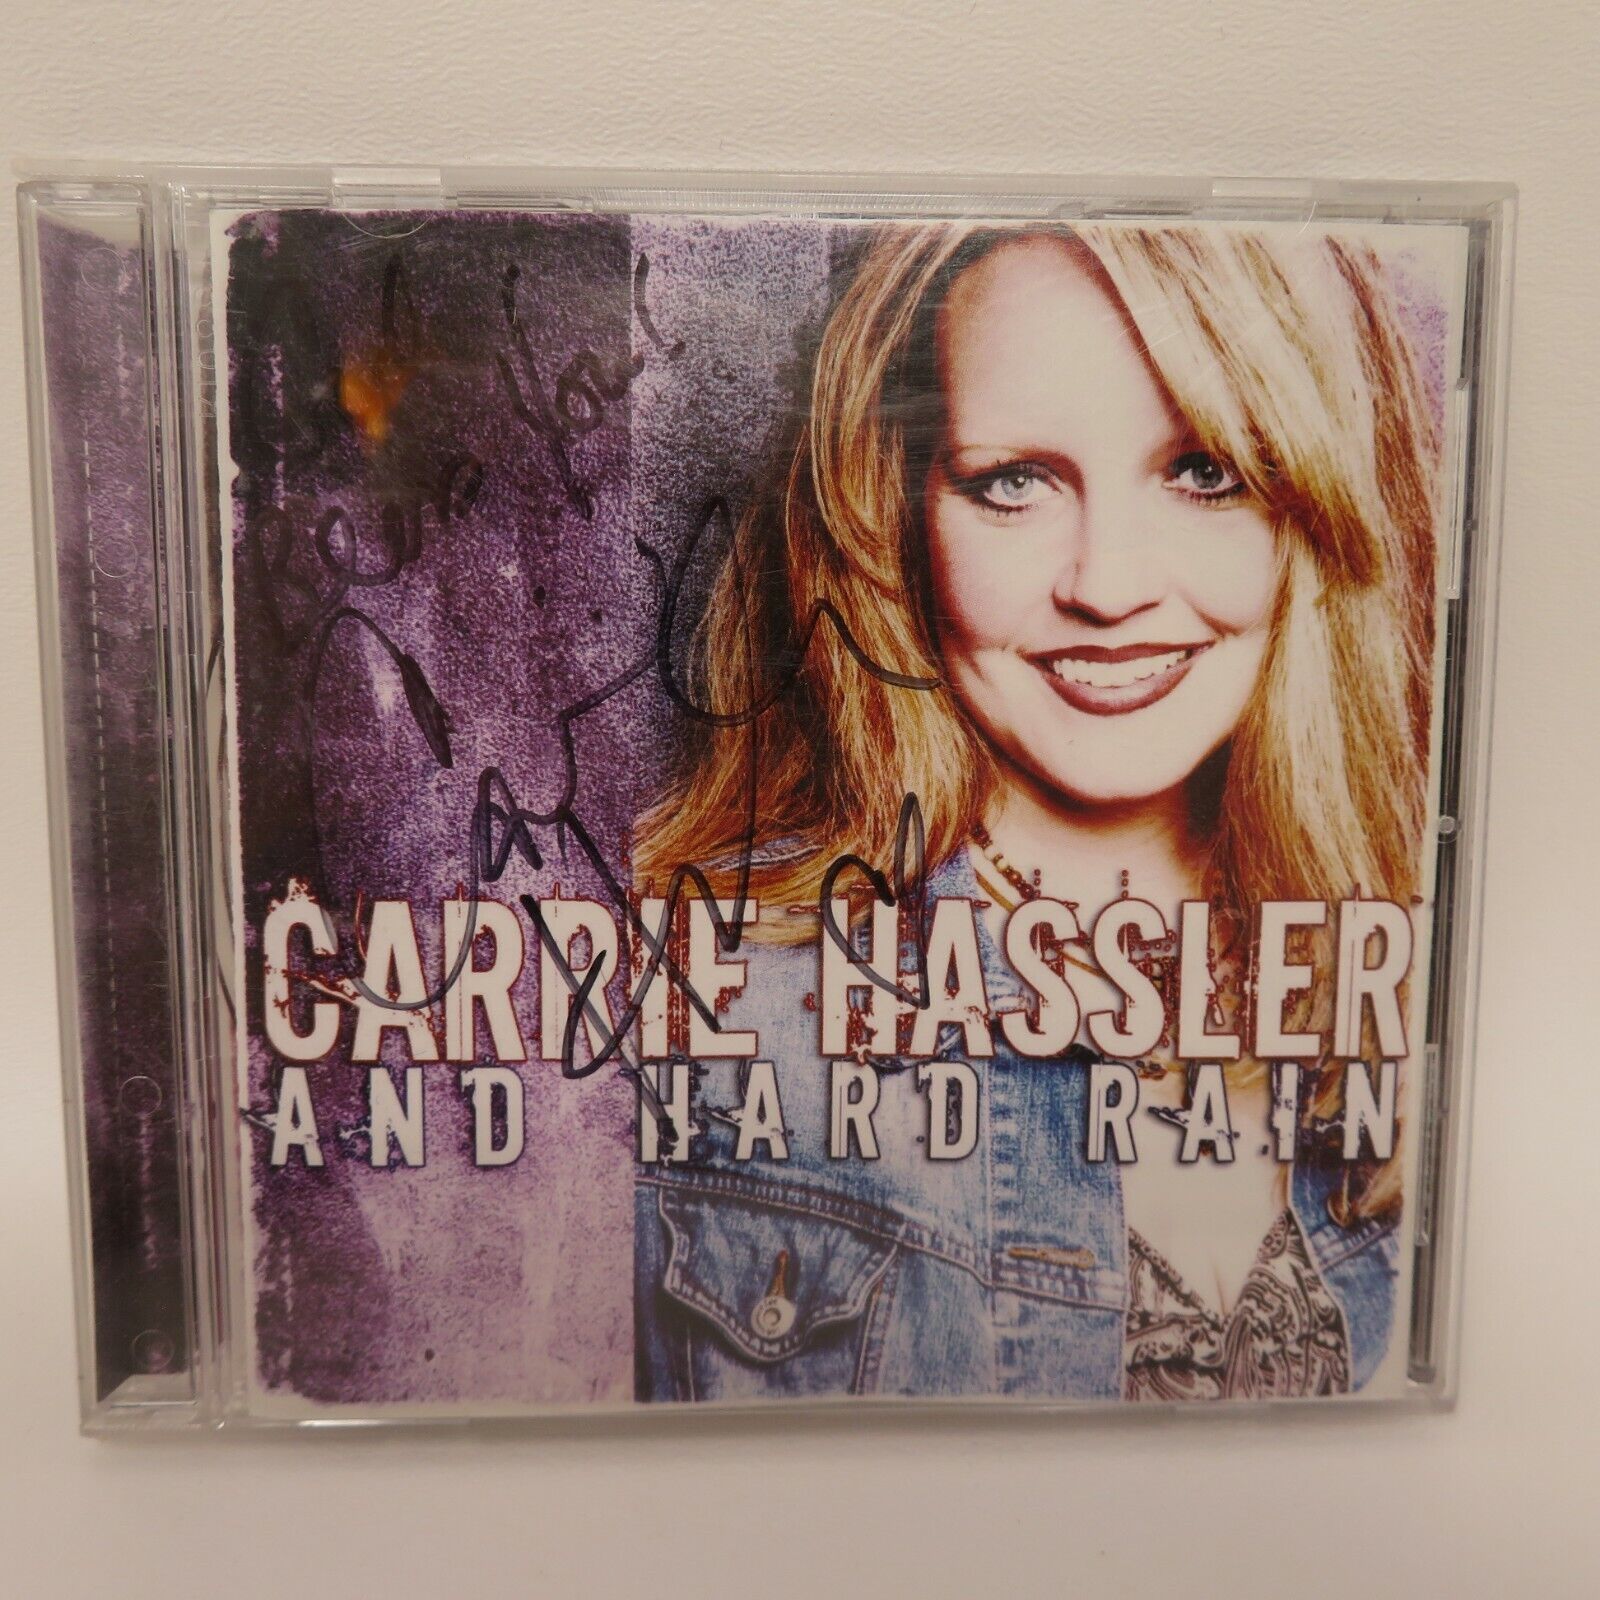 Vintage SIGNED Carrie Hassler and Hard Rain - Self Titled 2006 CD